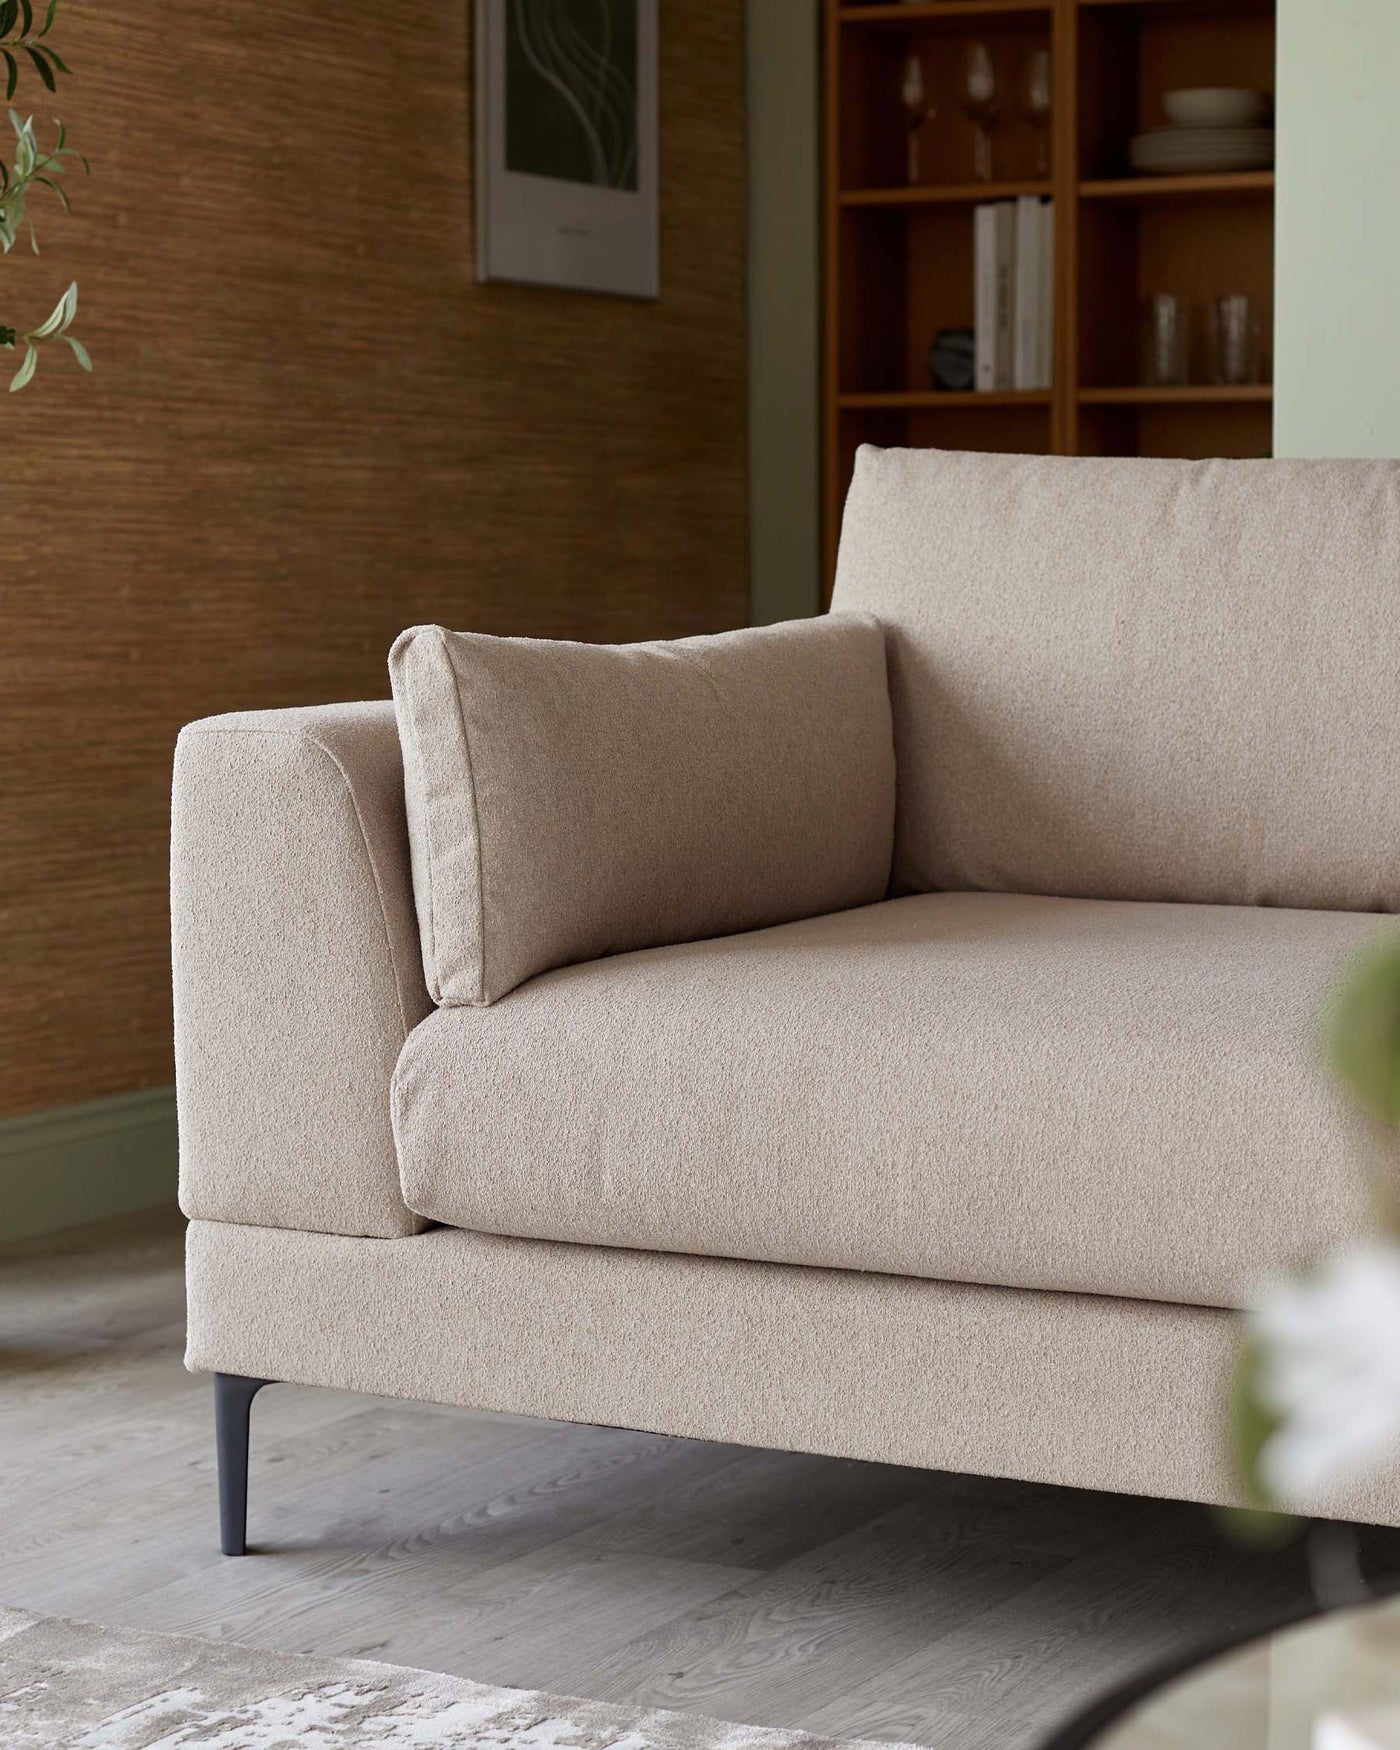 Contemporary beige upholstered sofa with a clean, minimalist design, featuring a single seat cushion, plush back cushion, square arms, and slender metal legs.